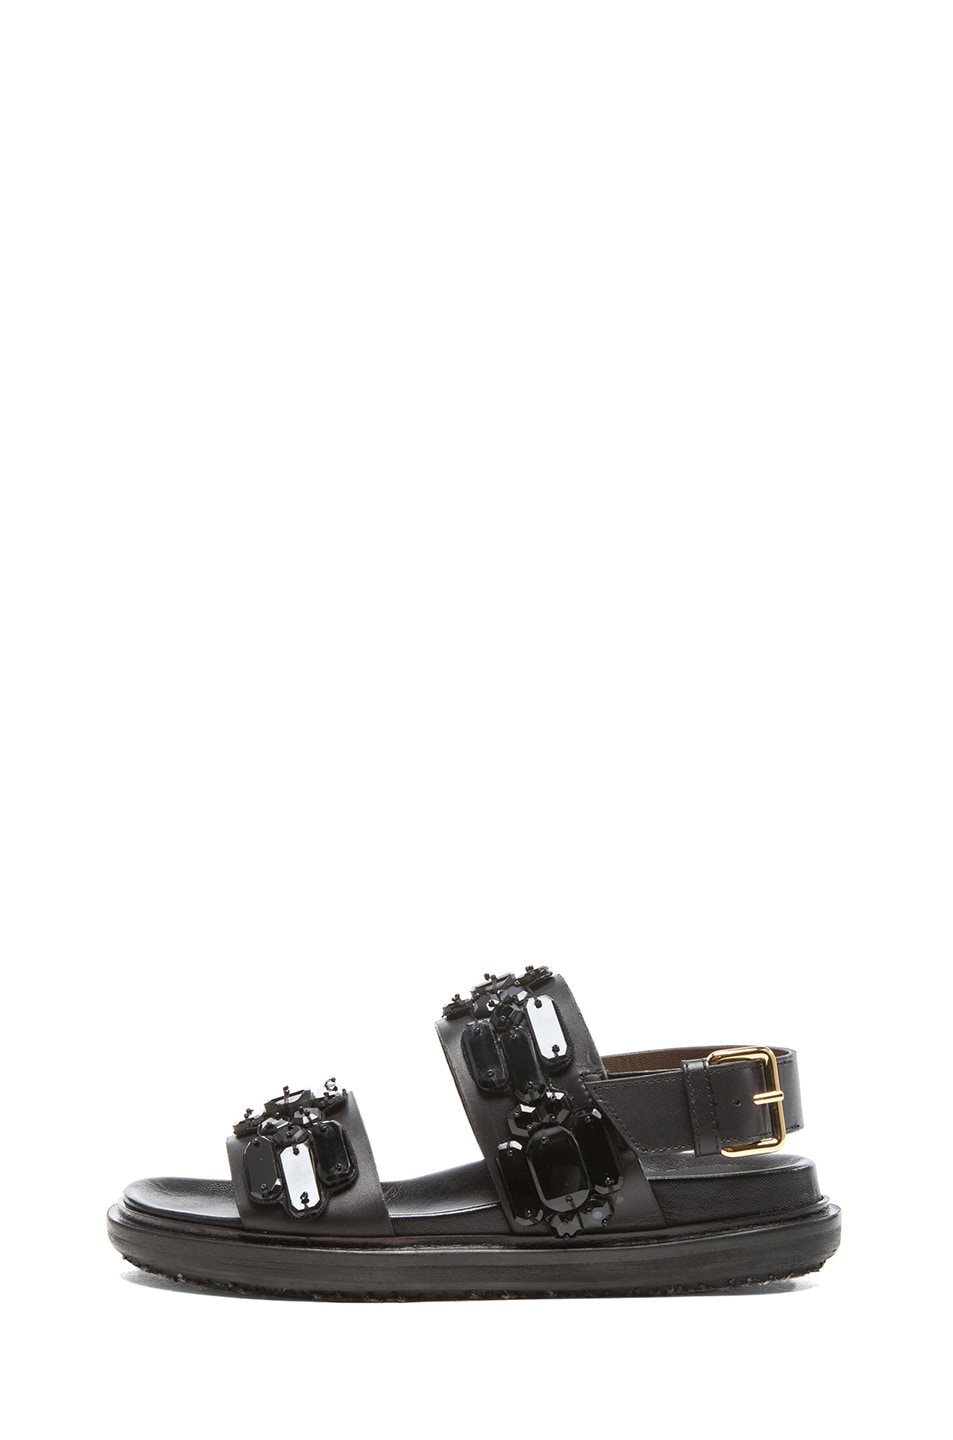 Image 1 of Marni Fussbett Calfskin Leather Sandals with Large Stones in Coal